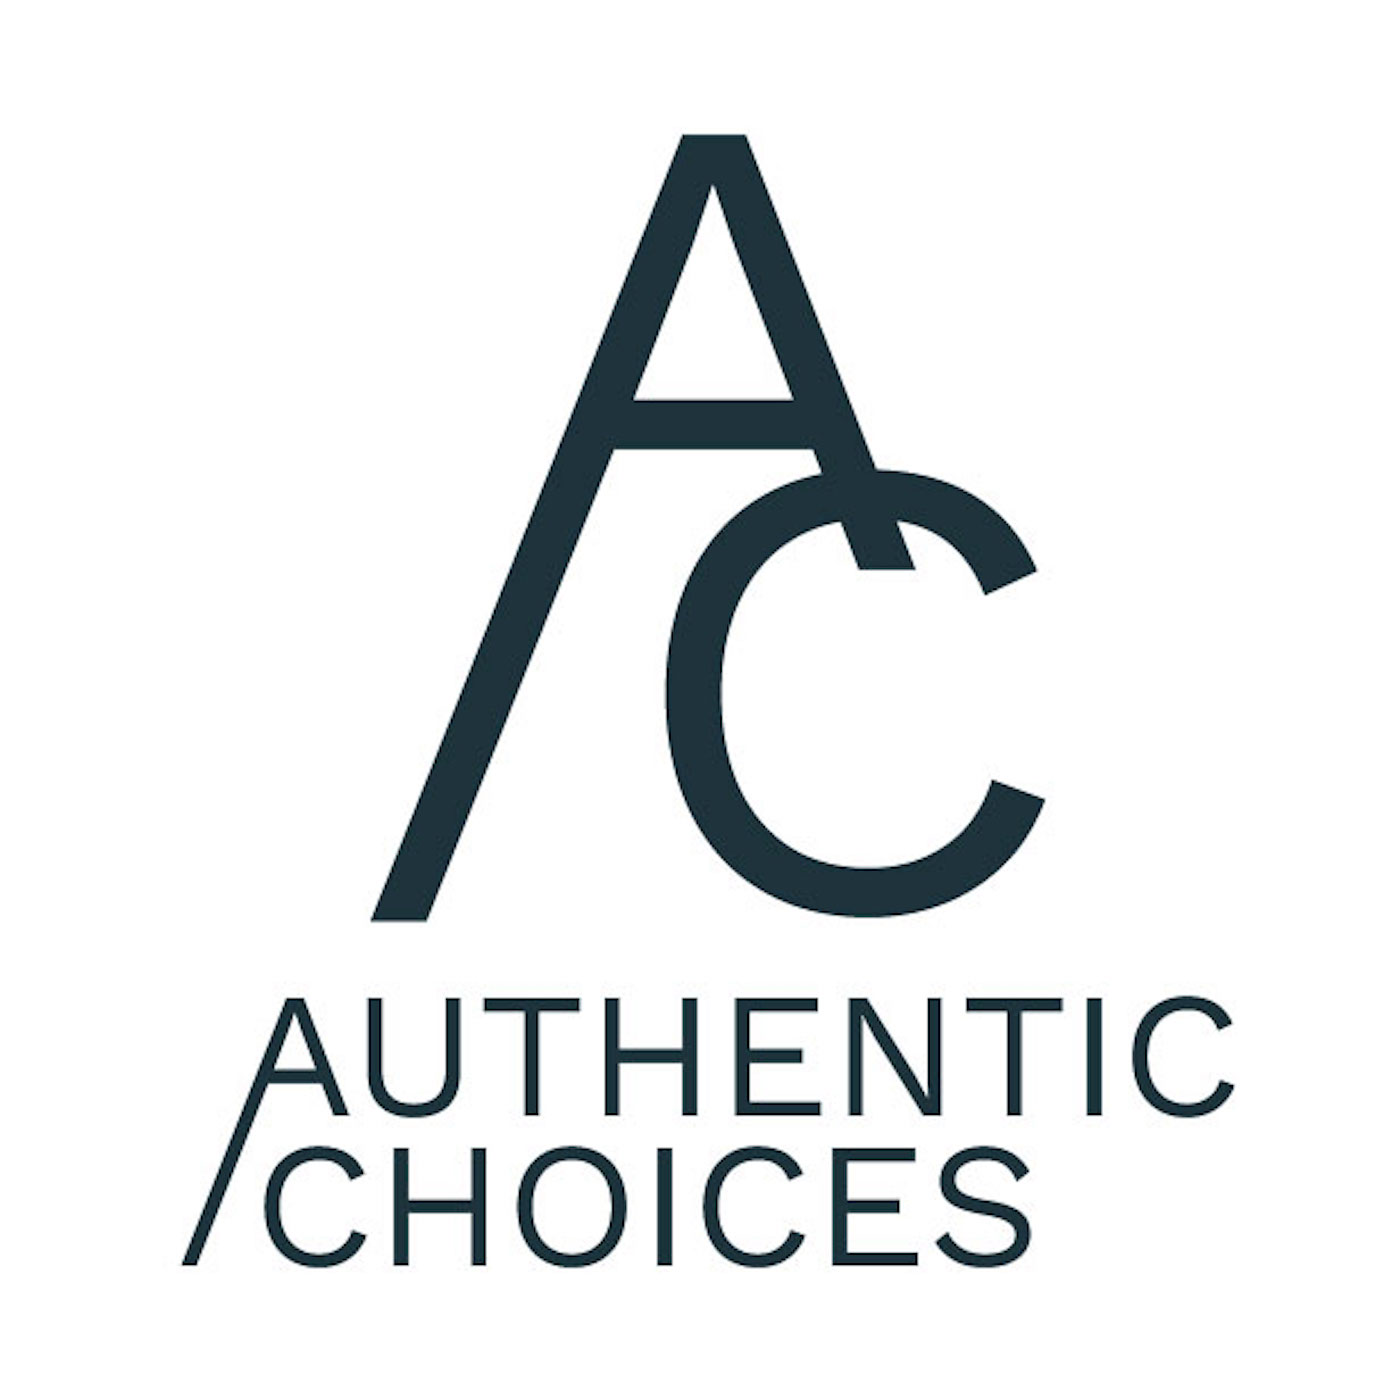 Authentic Choices    Insights for vertical growth